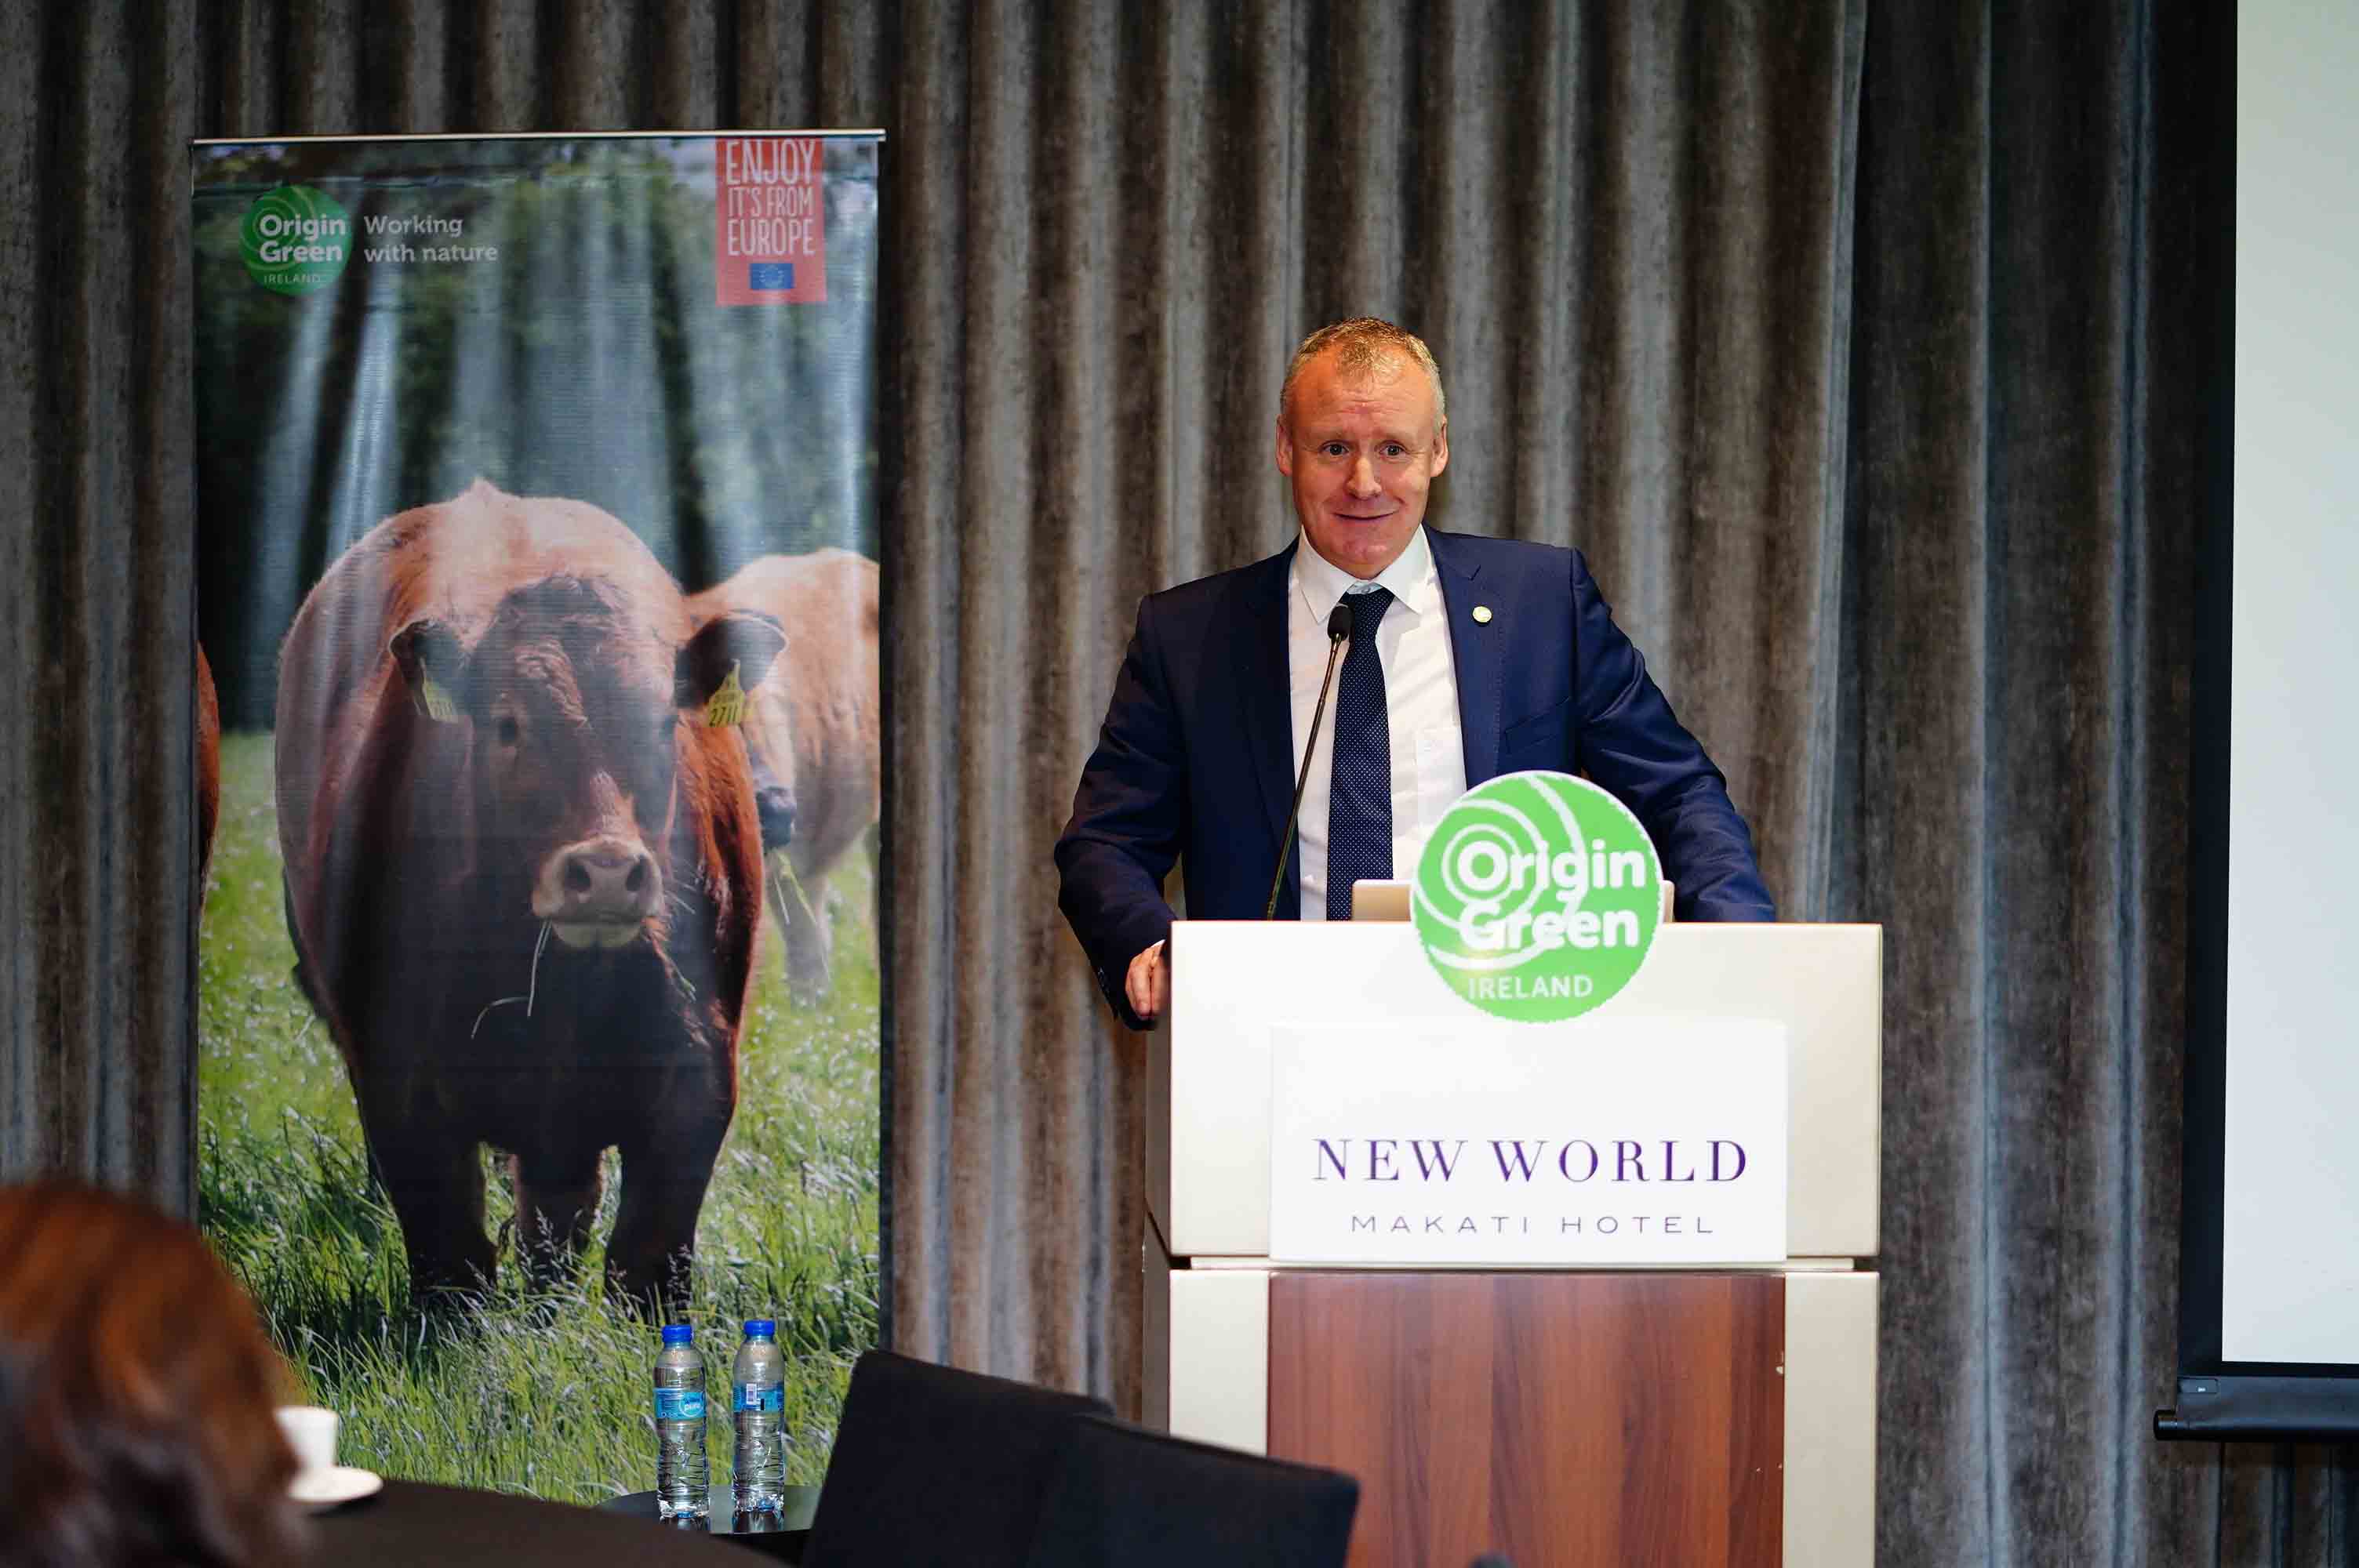 At the crossroads of sustainable animal farming, what is the key to the future?: Bord Bia plans to take farmers, and even consumers, to Ireland to learn about their standard procedures on maintaining and producing their high quality pork and beef